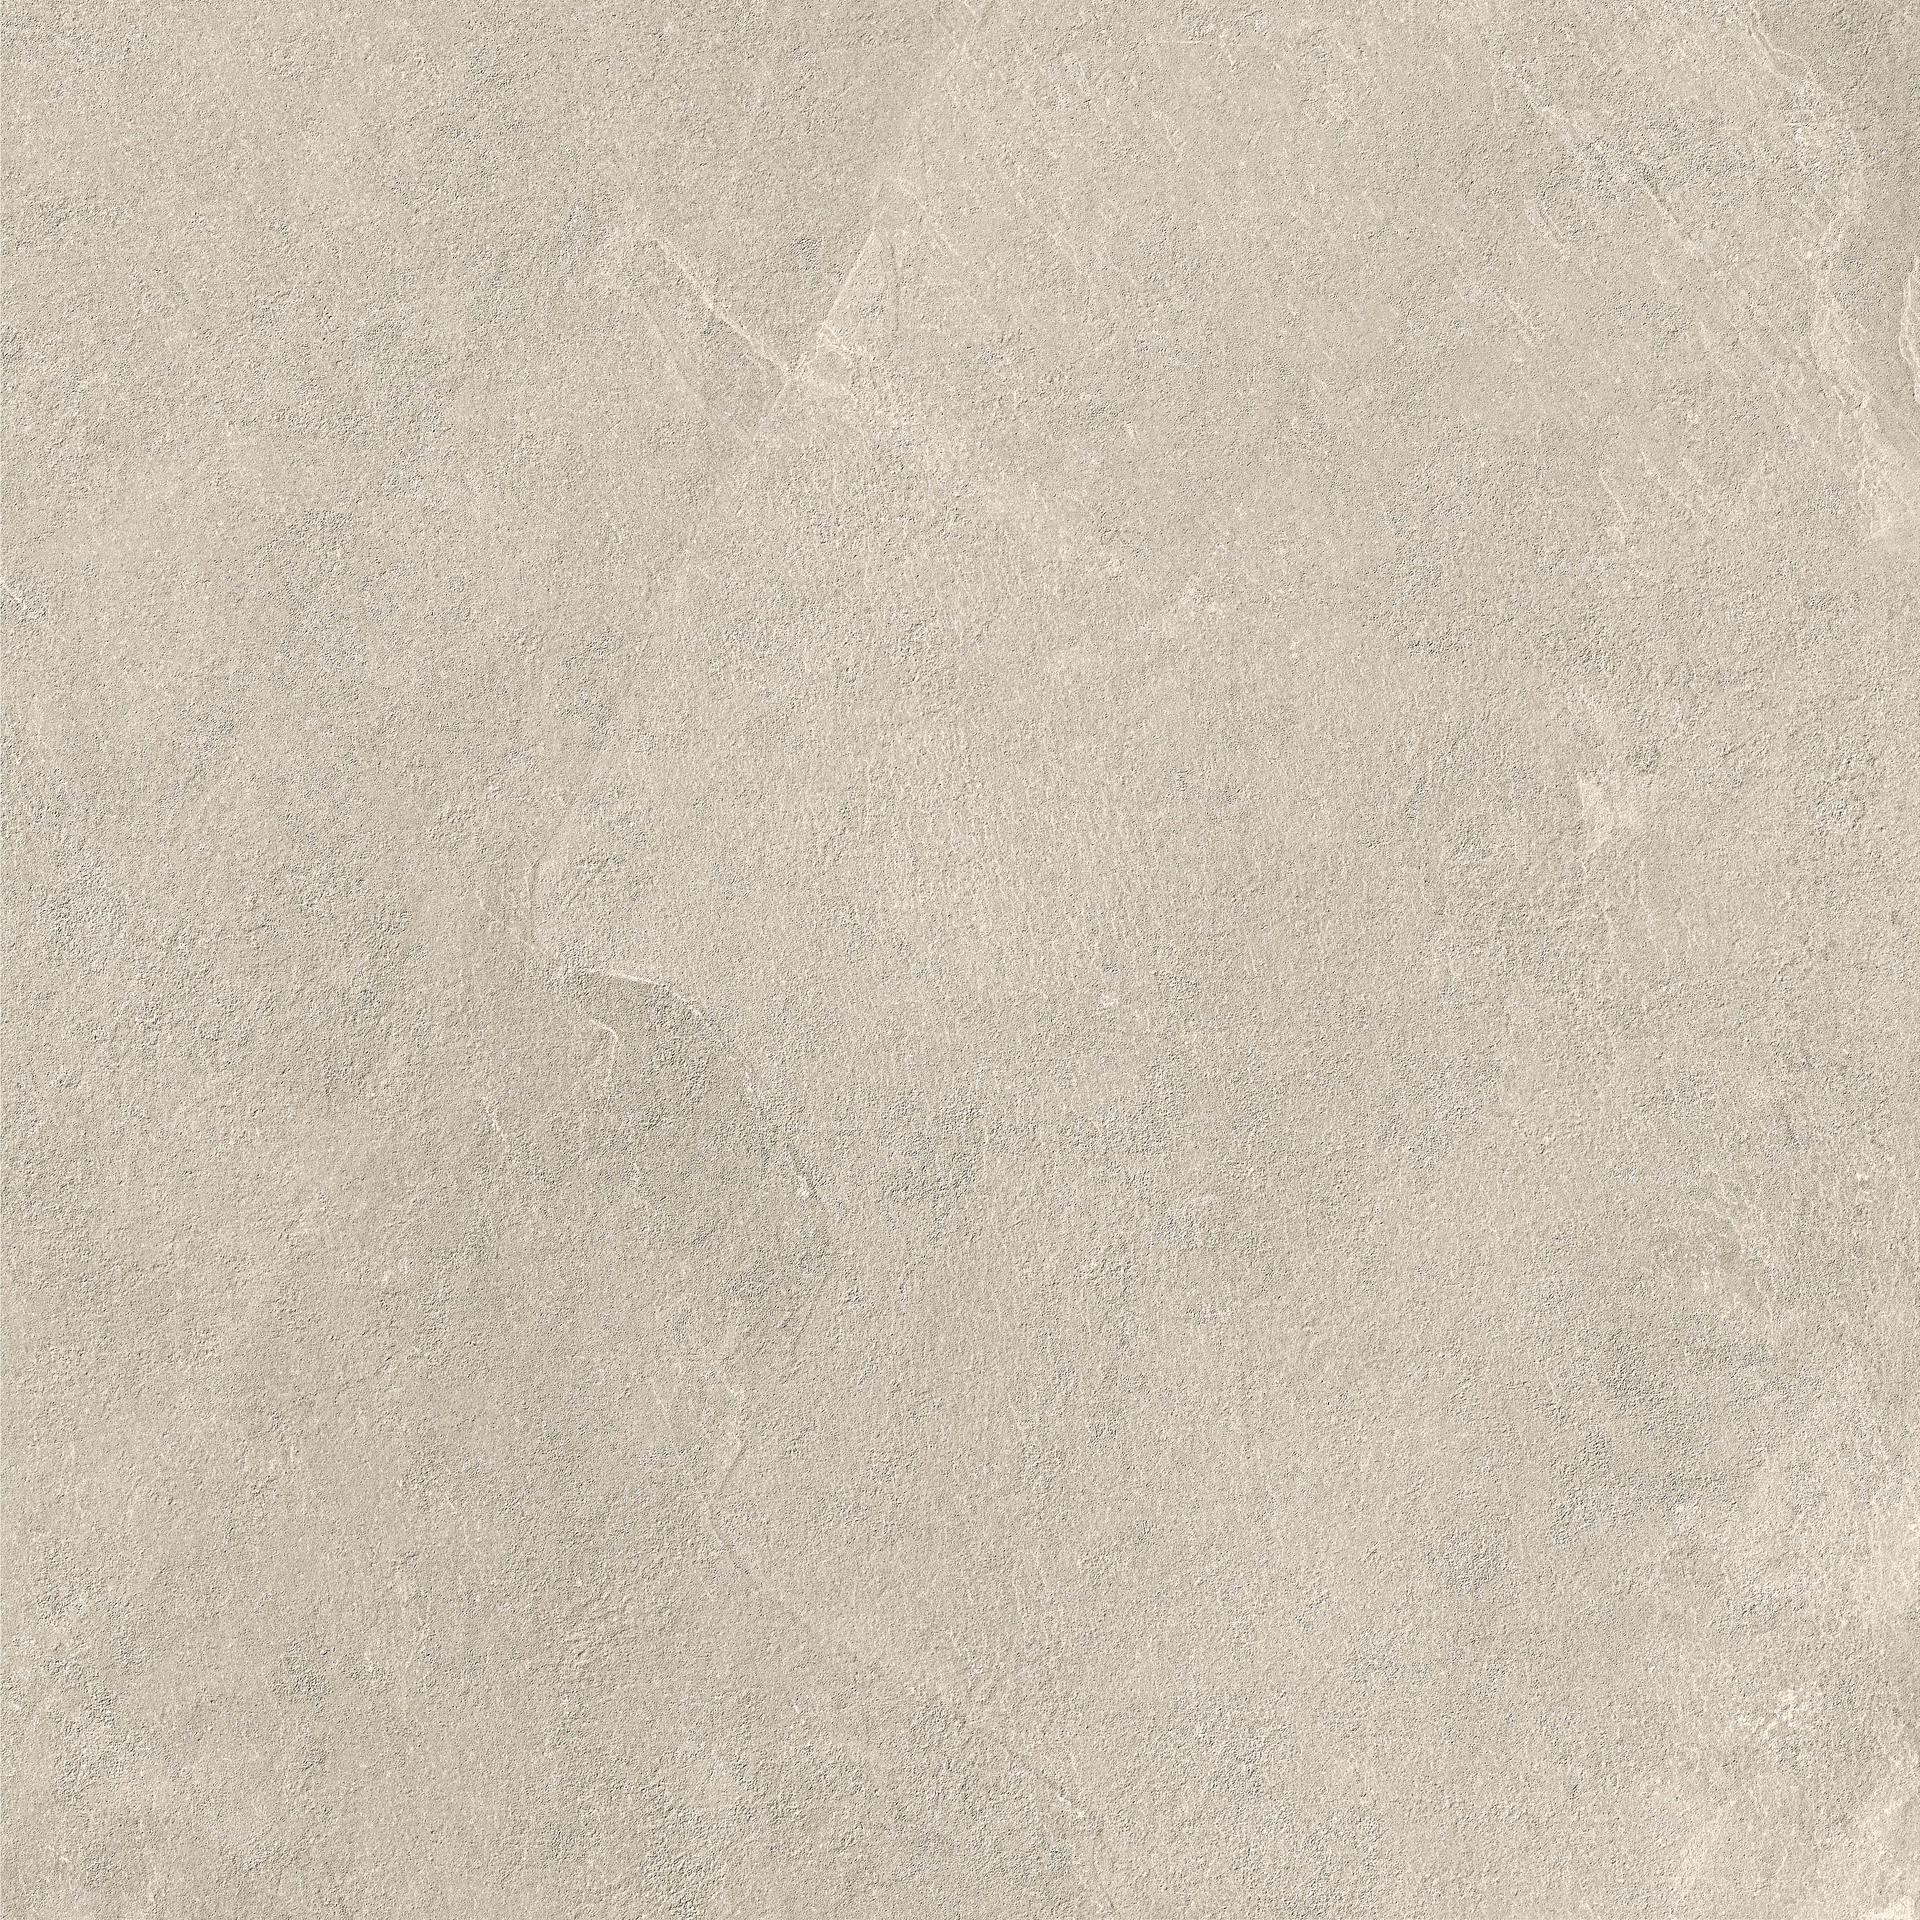 Panaria Zero.3 Stone Trace Glade Antibacterial - Naturale PZ8ST30 120x120cm rectified 6mm